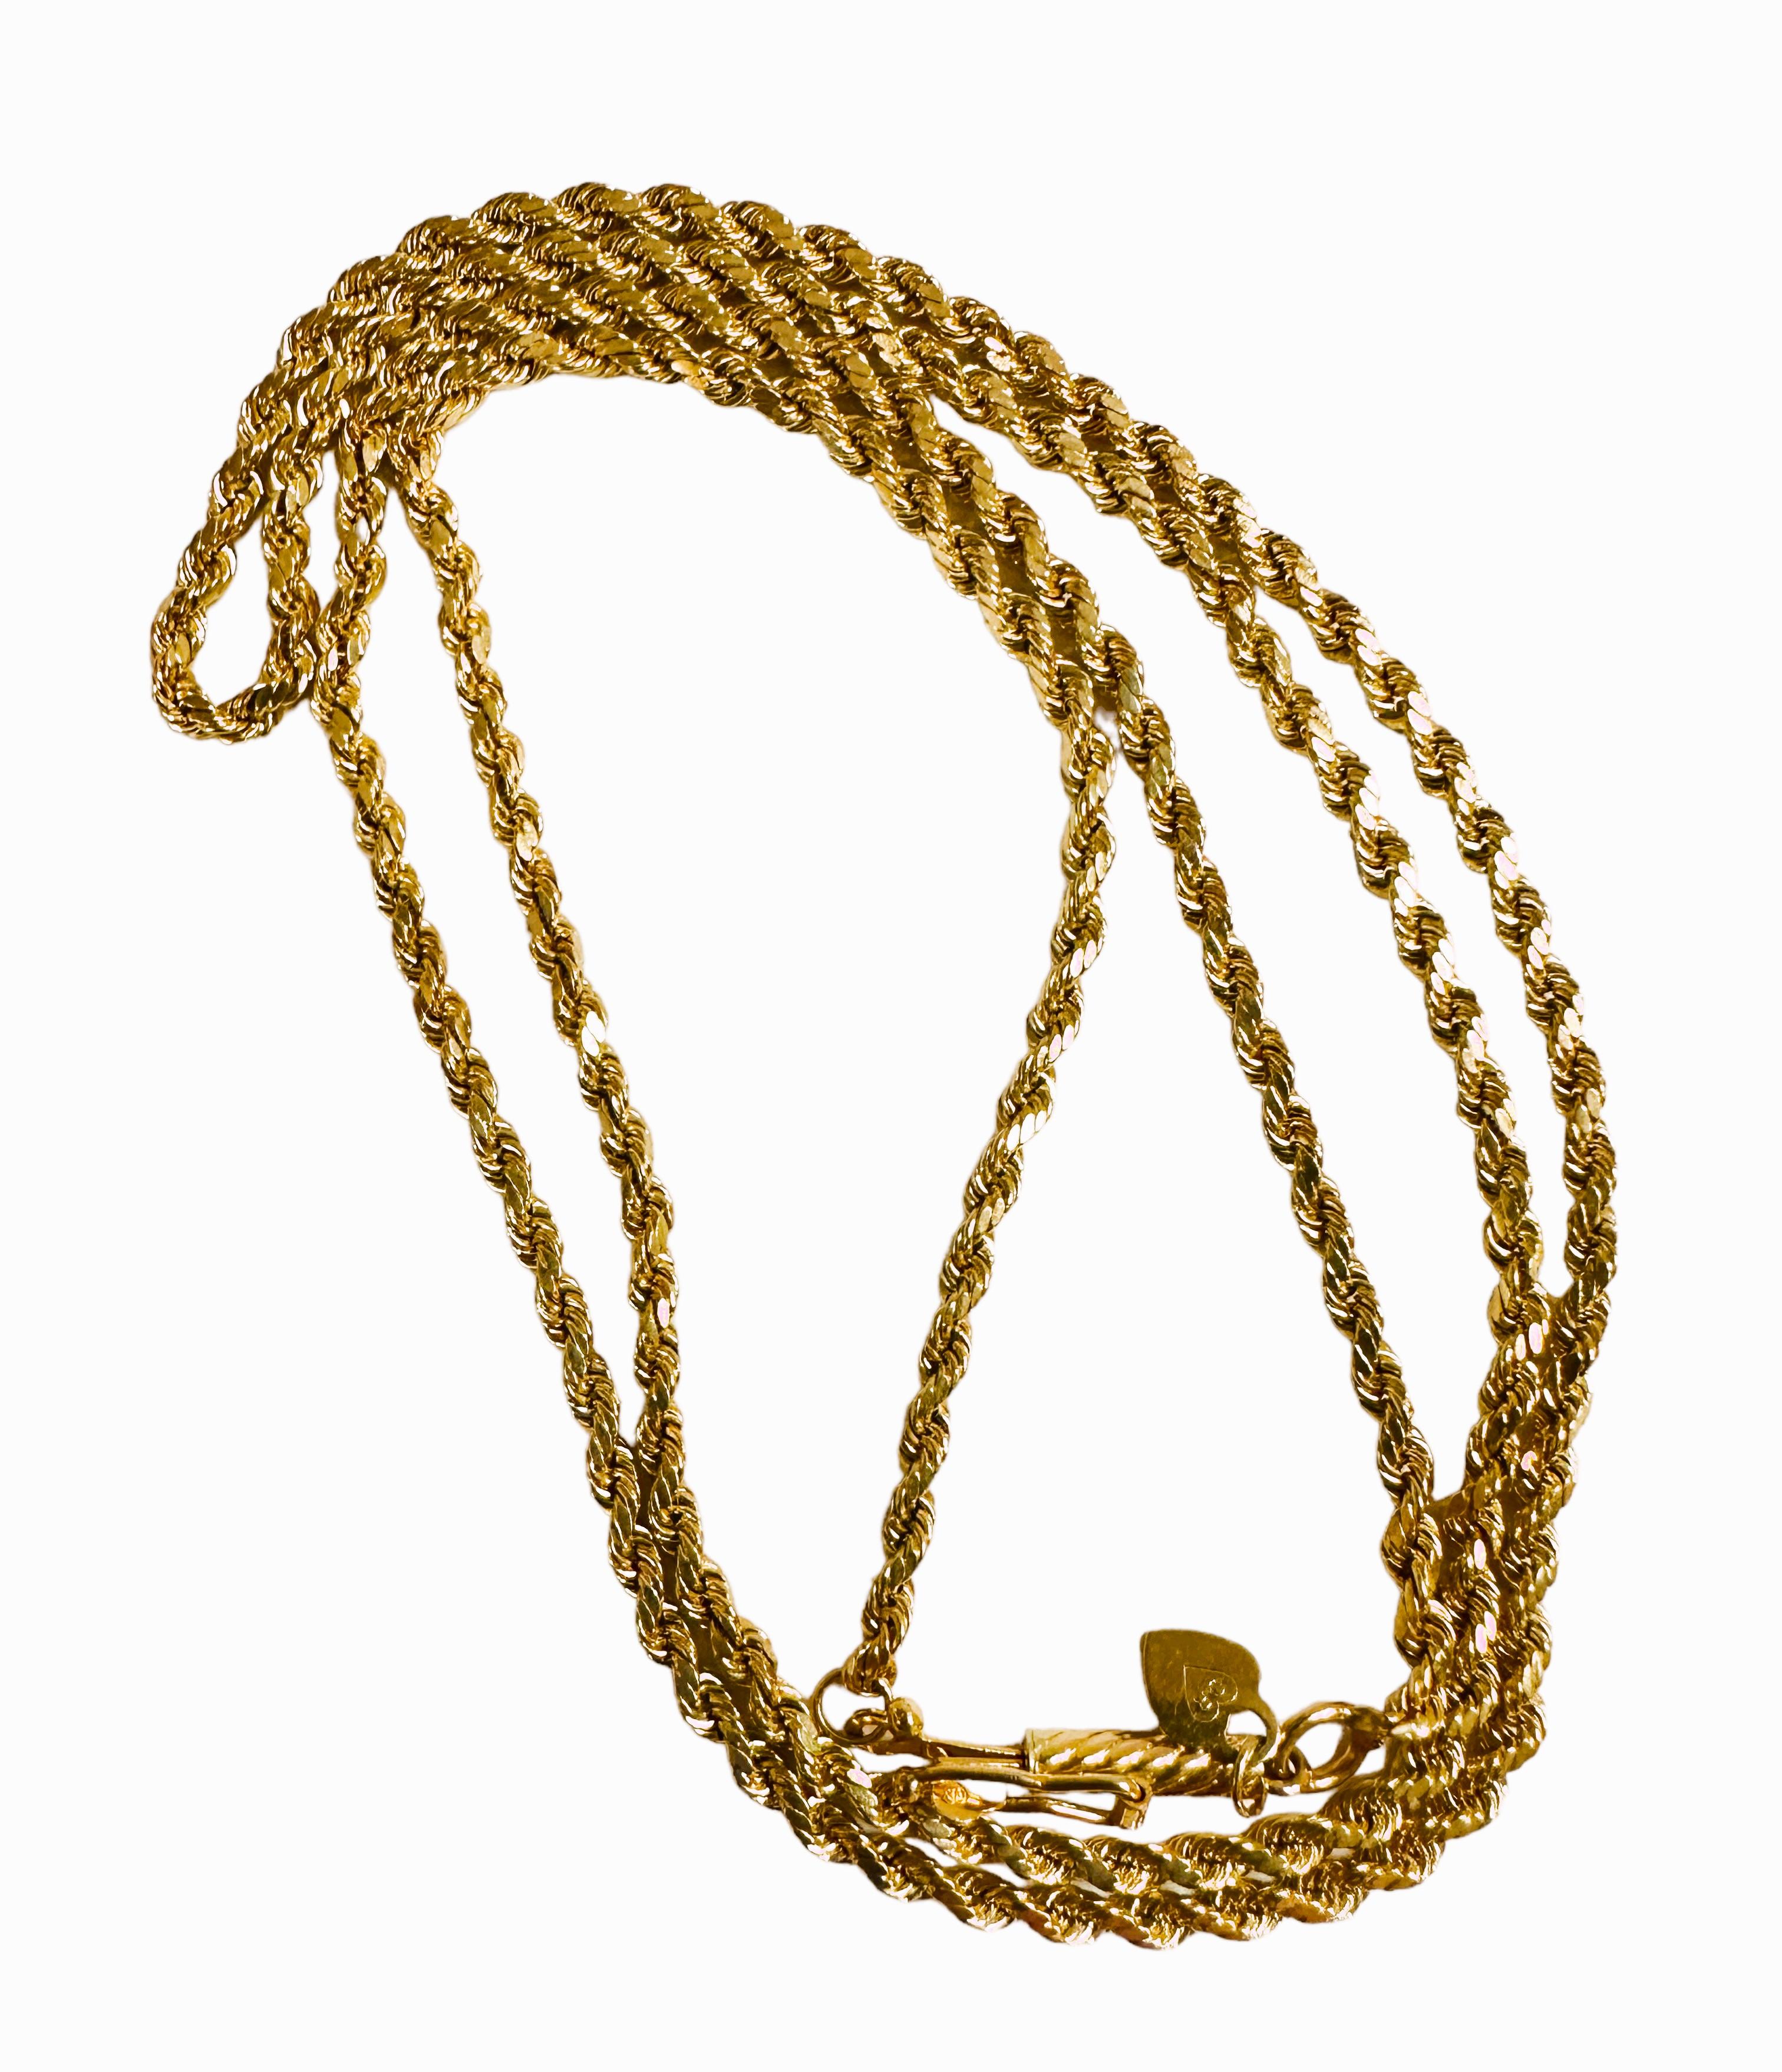 14K Yellow Gold Rope Chain 22 Inches 3.46 Grams For Sale 1